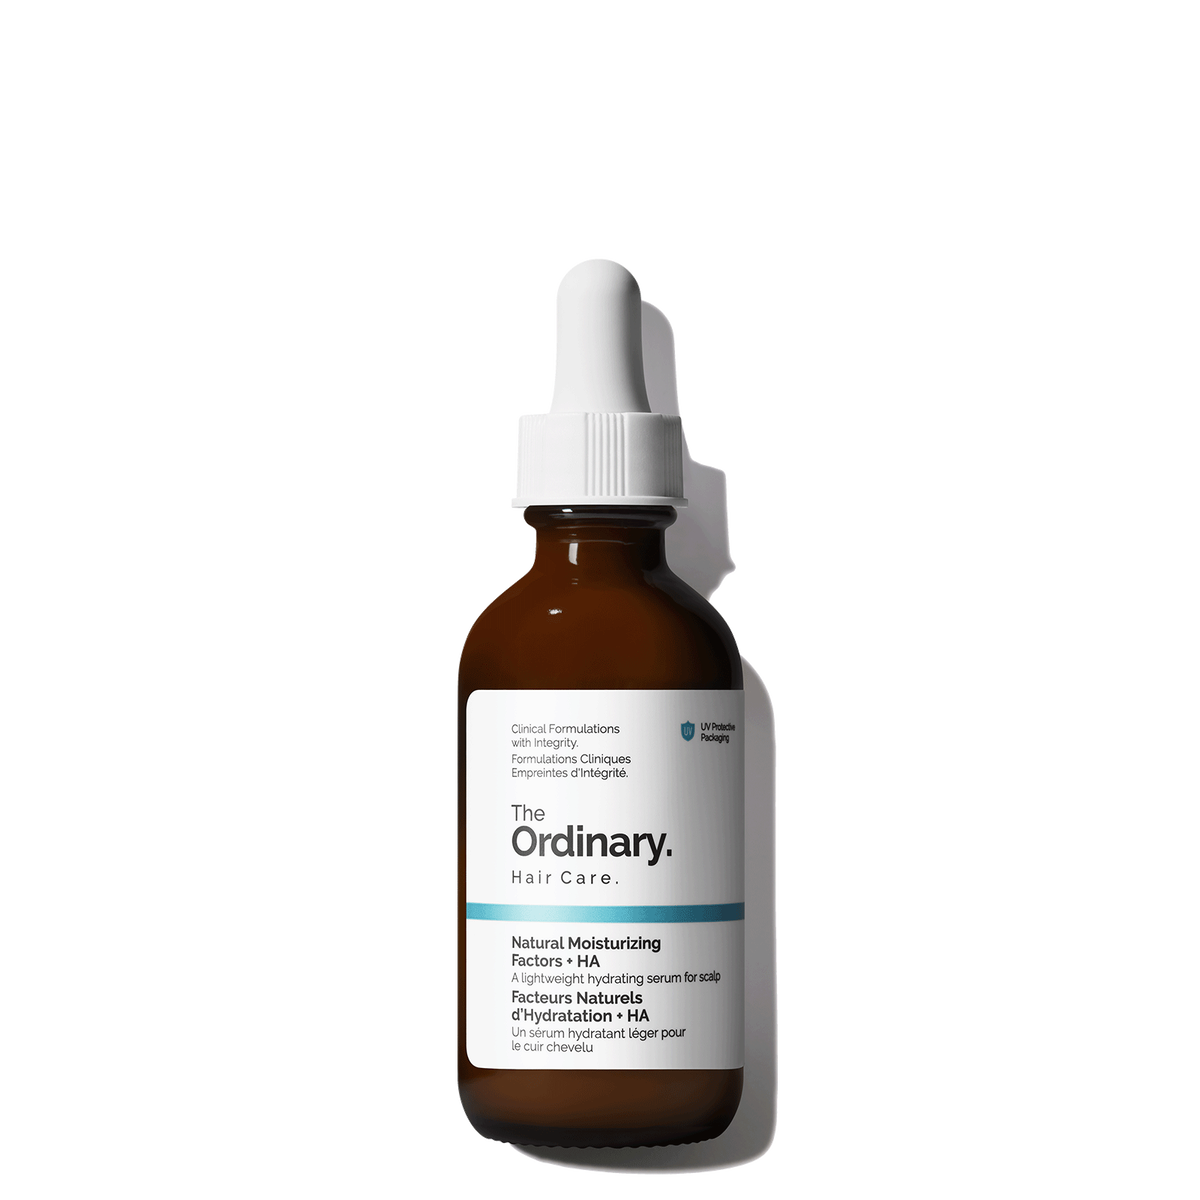 THE ORDINARY LIGHT WEIGHT HYDRATING SERUM FOR SCALP